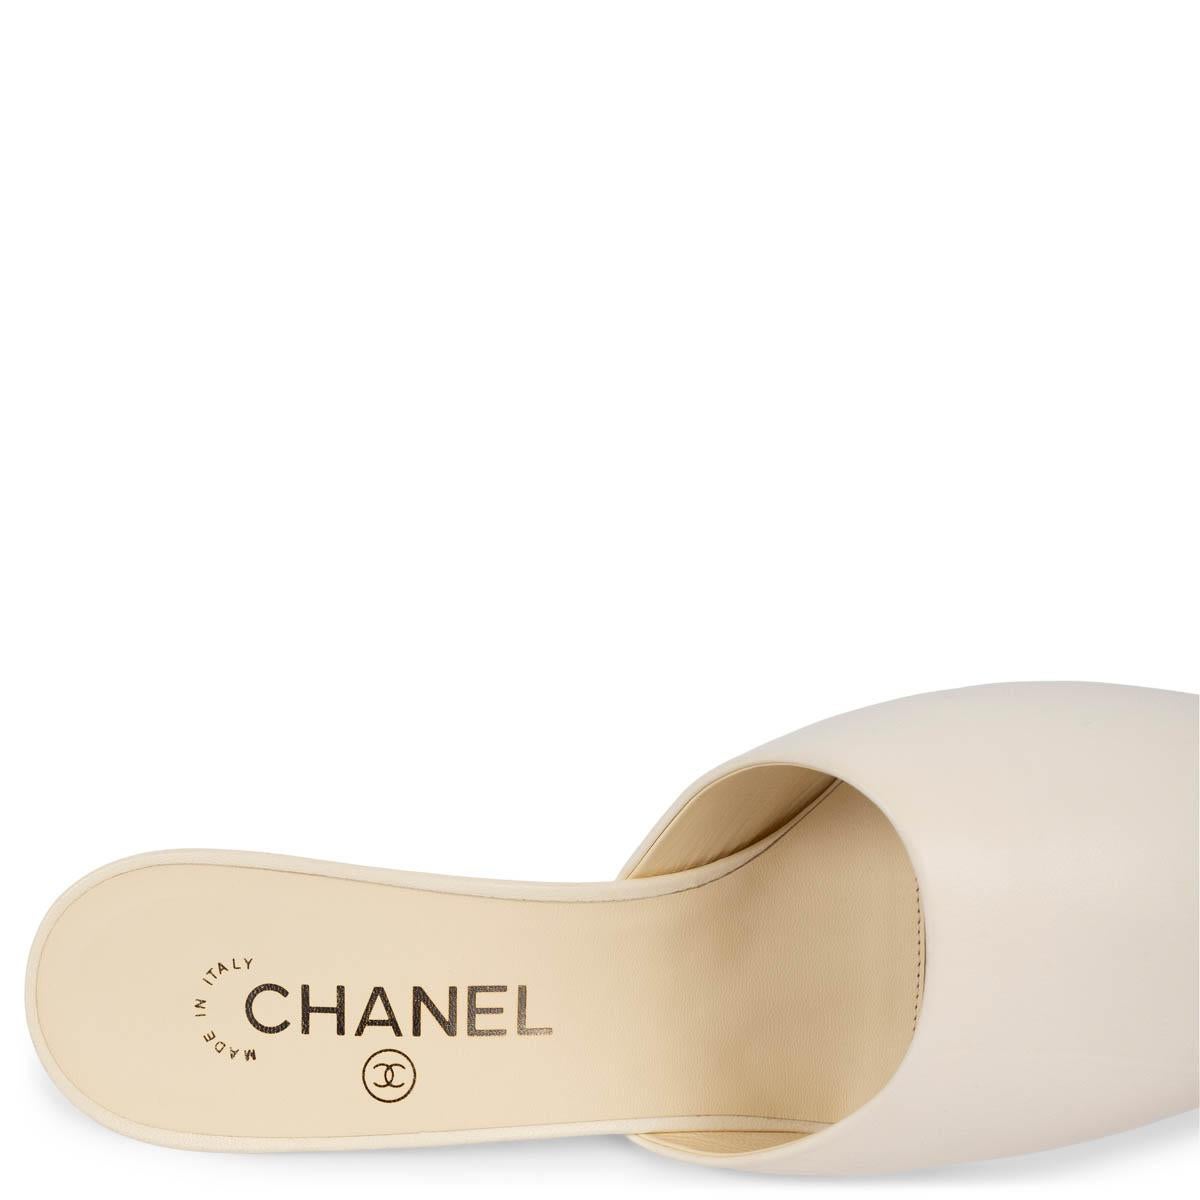 CHANEL cream leather 2016 16A ROME SNAKE PEARL HEEL Mules Shoes 38.5 For Sale 4